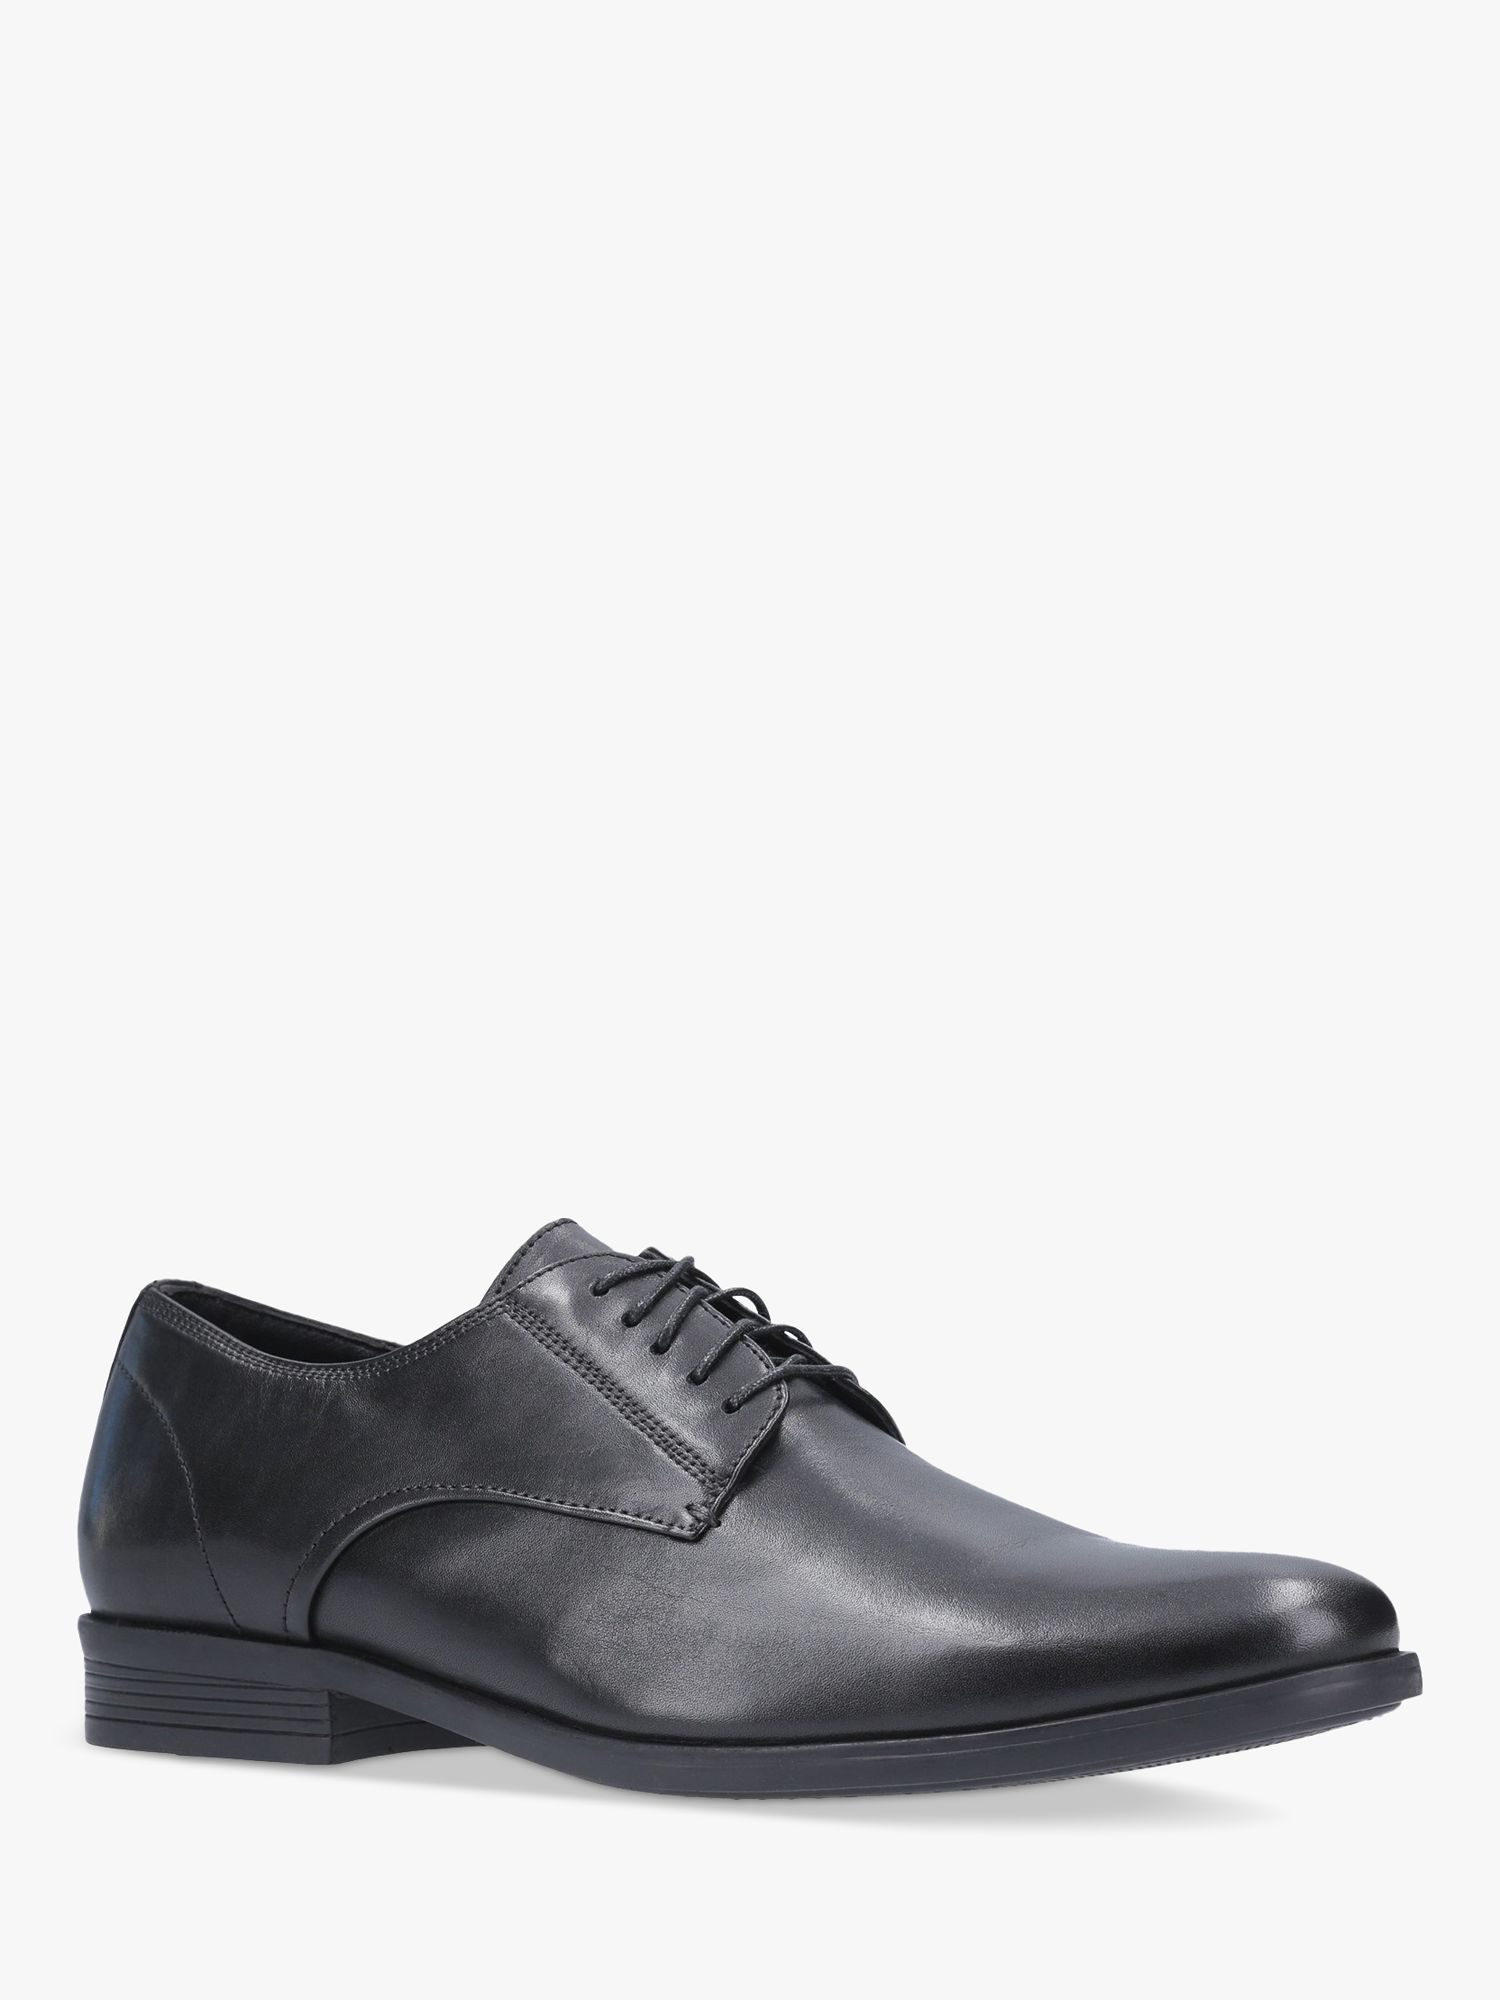 Buy Hush Puppies Oscar Clean Toe Leather Oxford Shoes Online at johnlewis.com